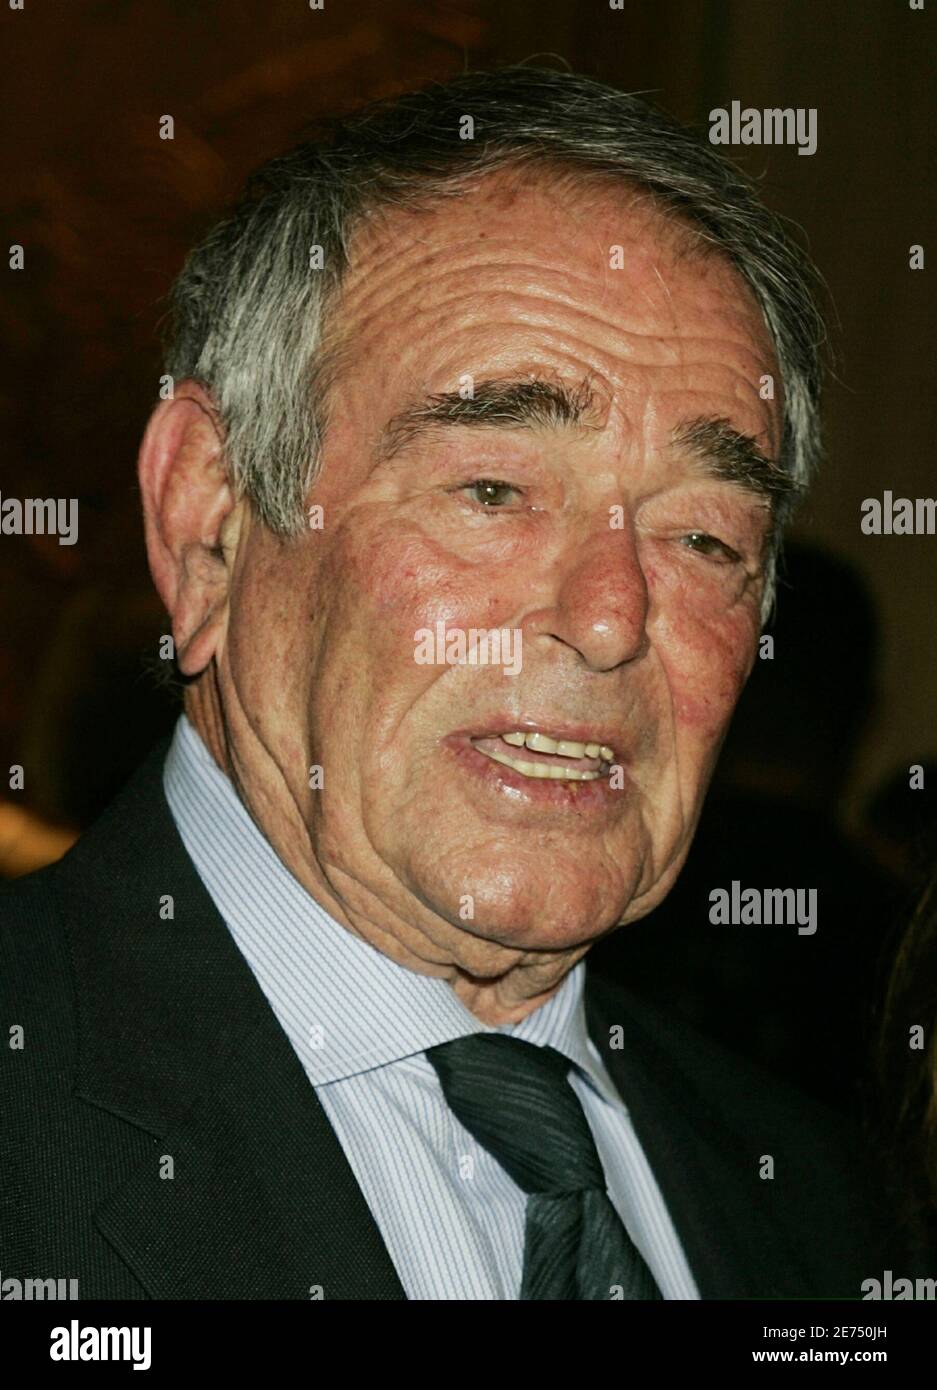 Actor Stuart Whitman poses at the [David Gest] gala titled 'THE Party' in Beverly Hills October 17, 2005. [Gest], a producer, held the gala to celebrate the launch of his new Hollywood based firm 'Extreme Entertaintment Enterprises' which is set to produce a television special in 2006 titled ['Dionne Warwick 45th Anniversary Spectacular.'] Stock Photo